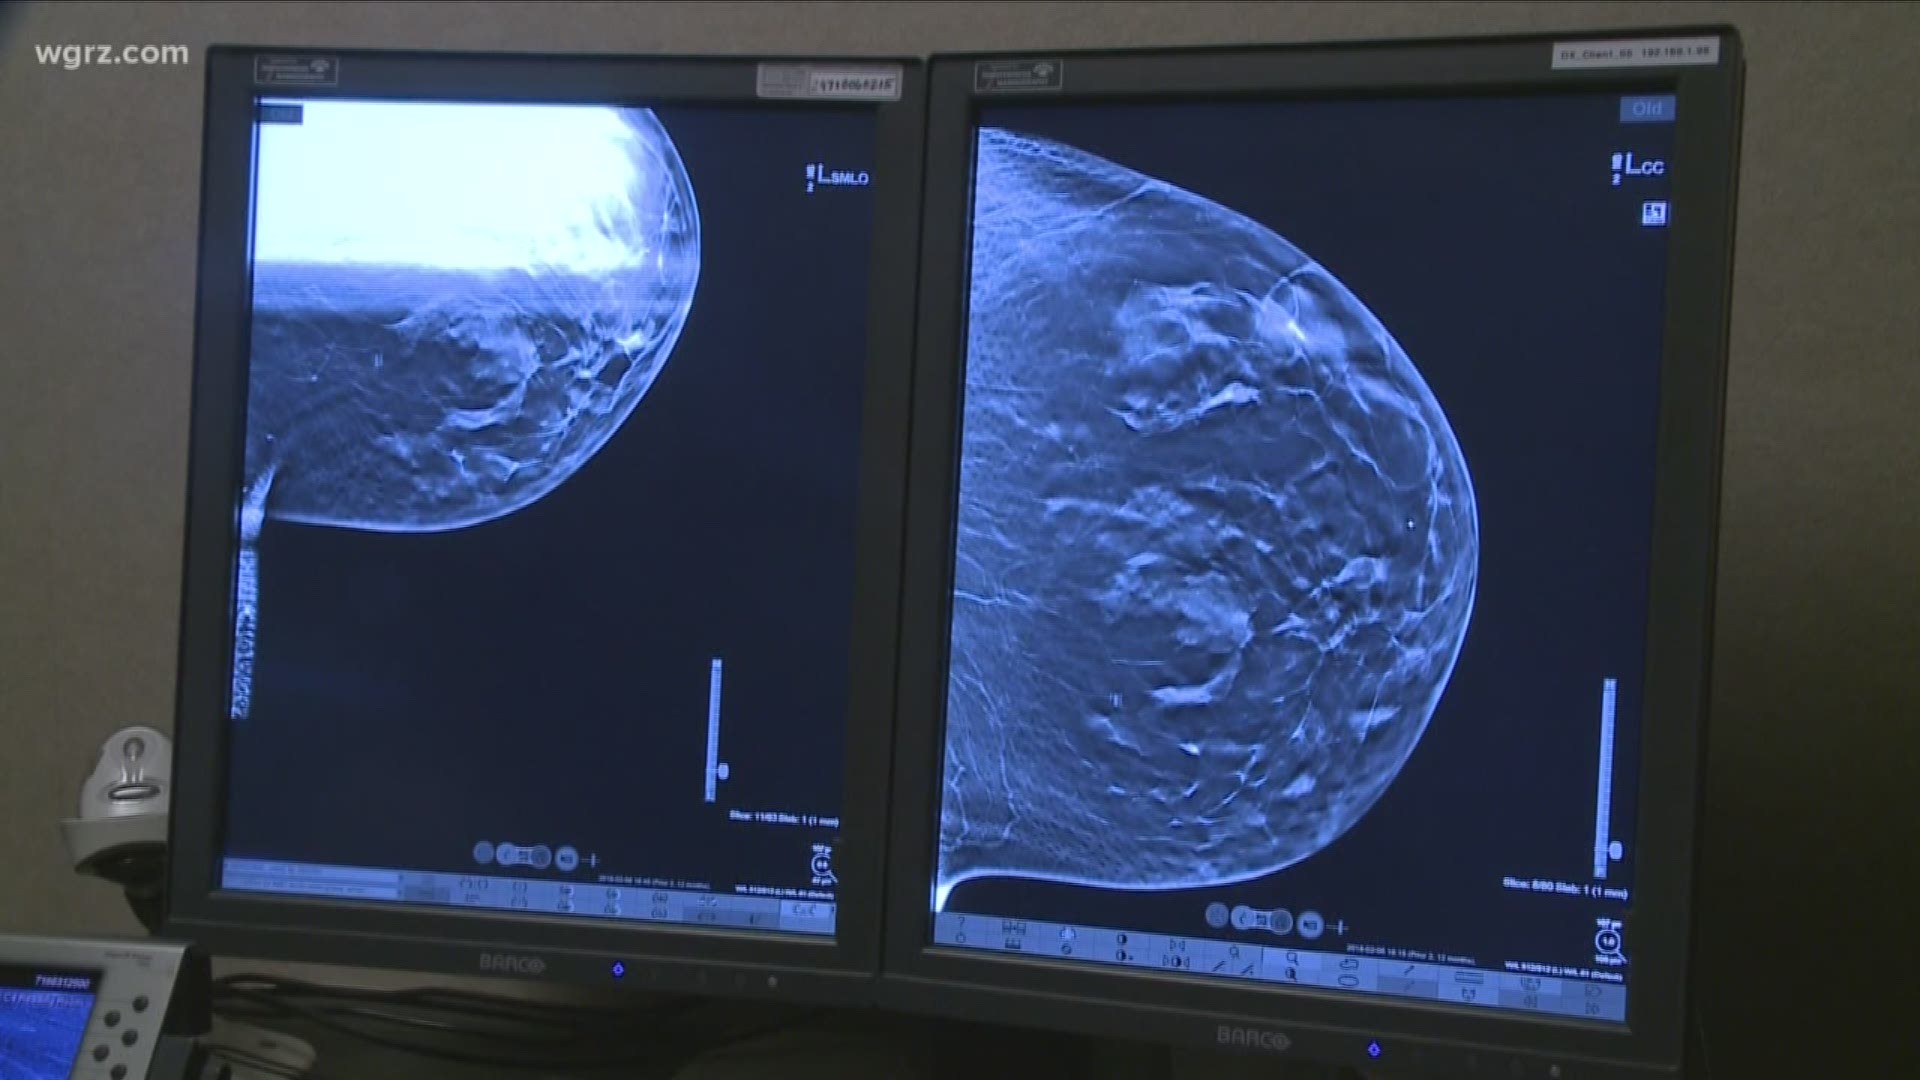 Windsong Uses 3D Breast Cancer Screenings